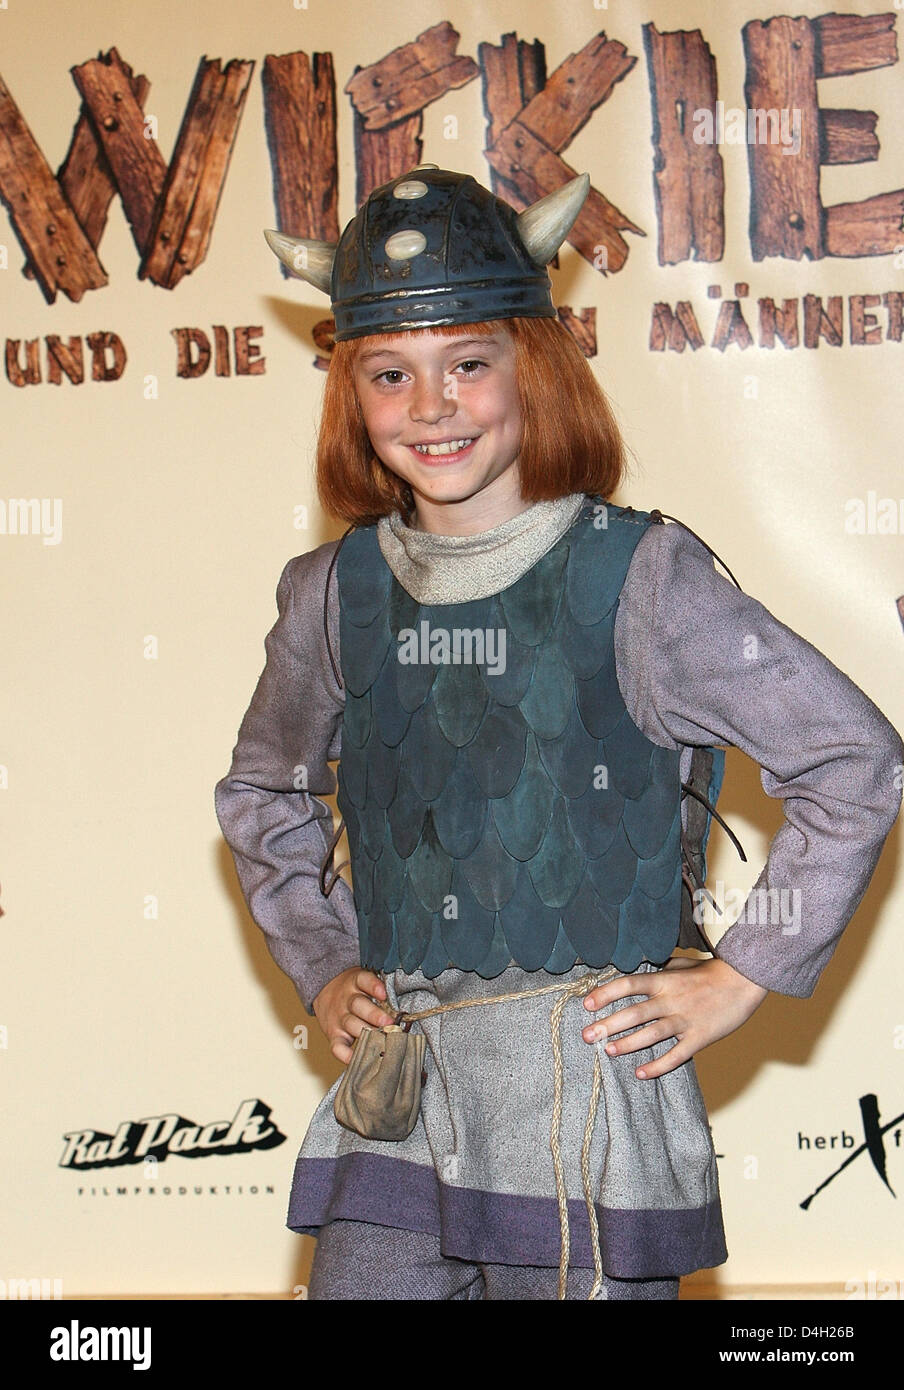 Actor Jonas Haemmerle poses during a photo call at a film studio in Munich, Germany, 31 July 2008. Haemmerle stars as Viking boy 'Wickie' in the motion picture 'Wickie und die starken Maenner' ('Vicky the Viking') directed by Michael Bully Herbig. The movie is scheduled to kick off at German cinemas in 2009. Photo: URSUAL DUEREN Stock Photo